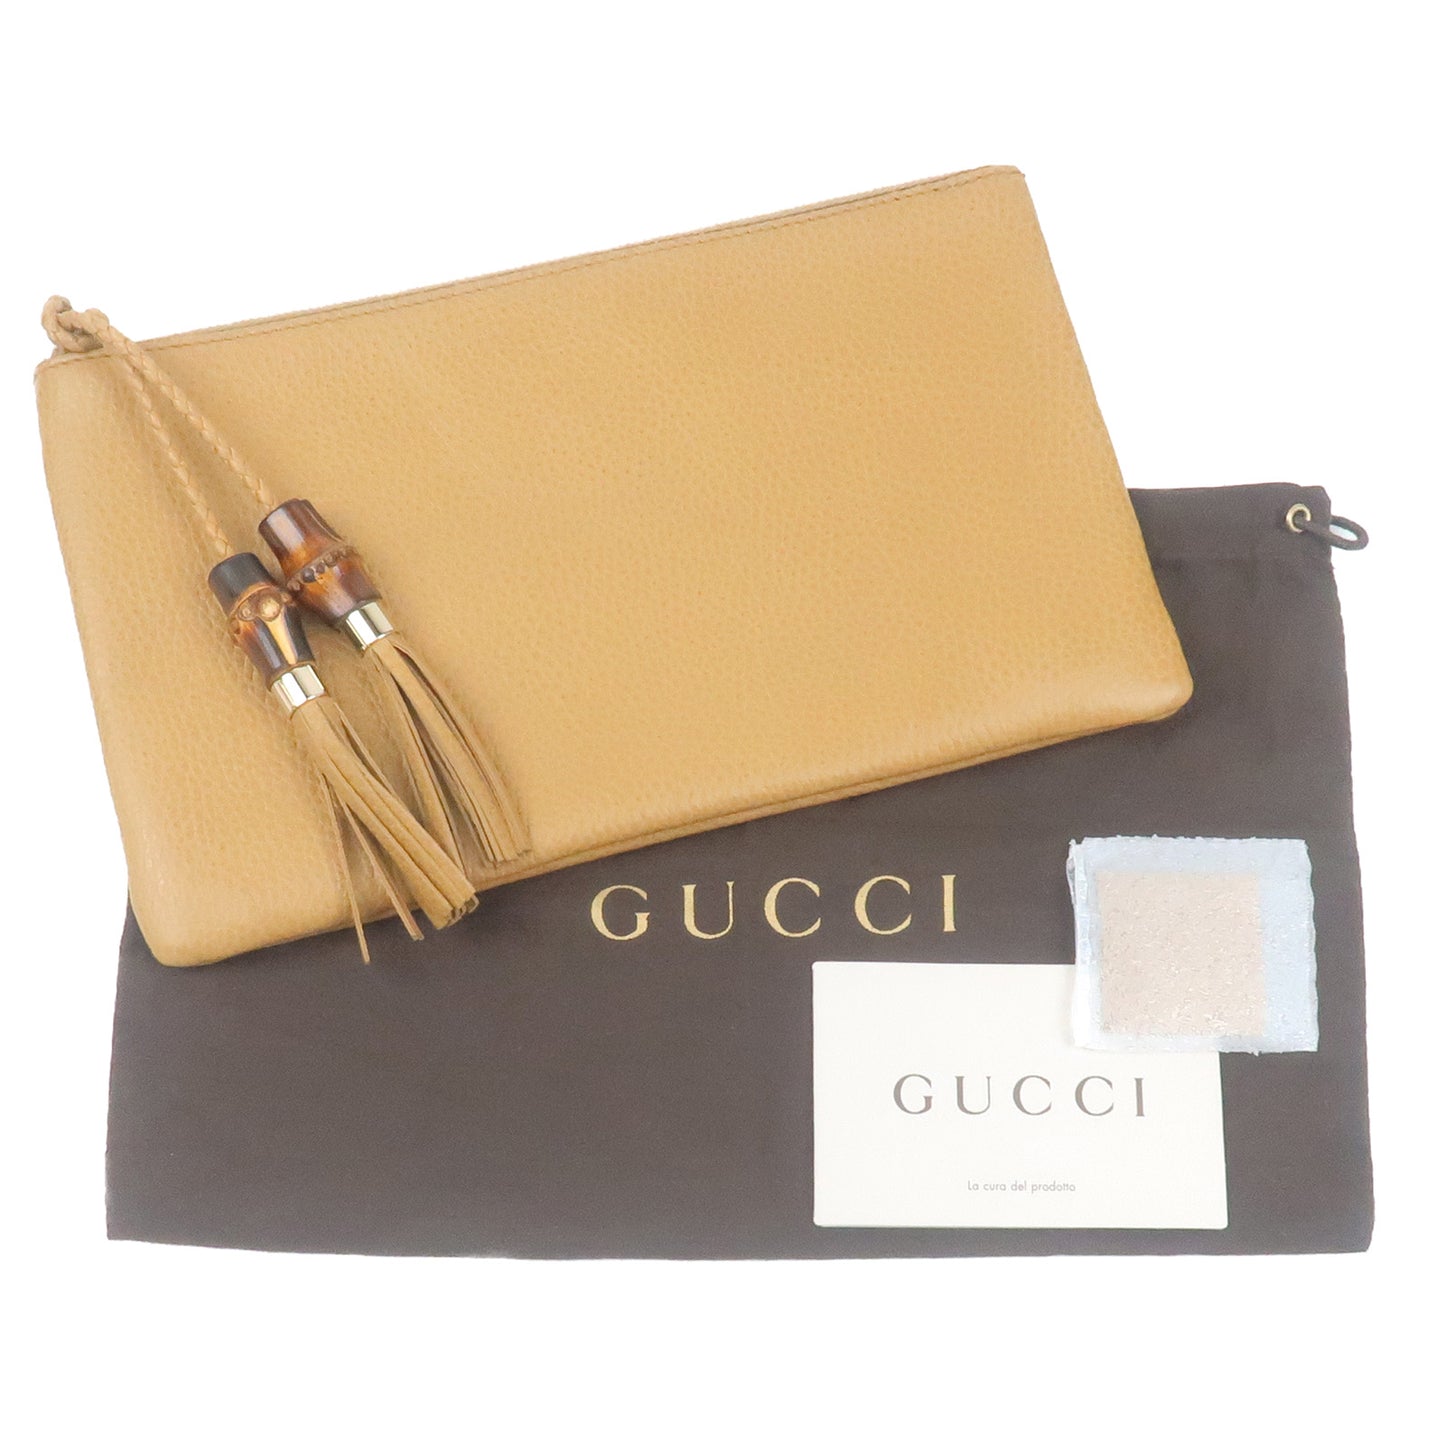 GUCCI Leather Bamboo Pouch Clutch Bag Light Brown 376854